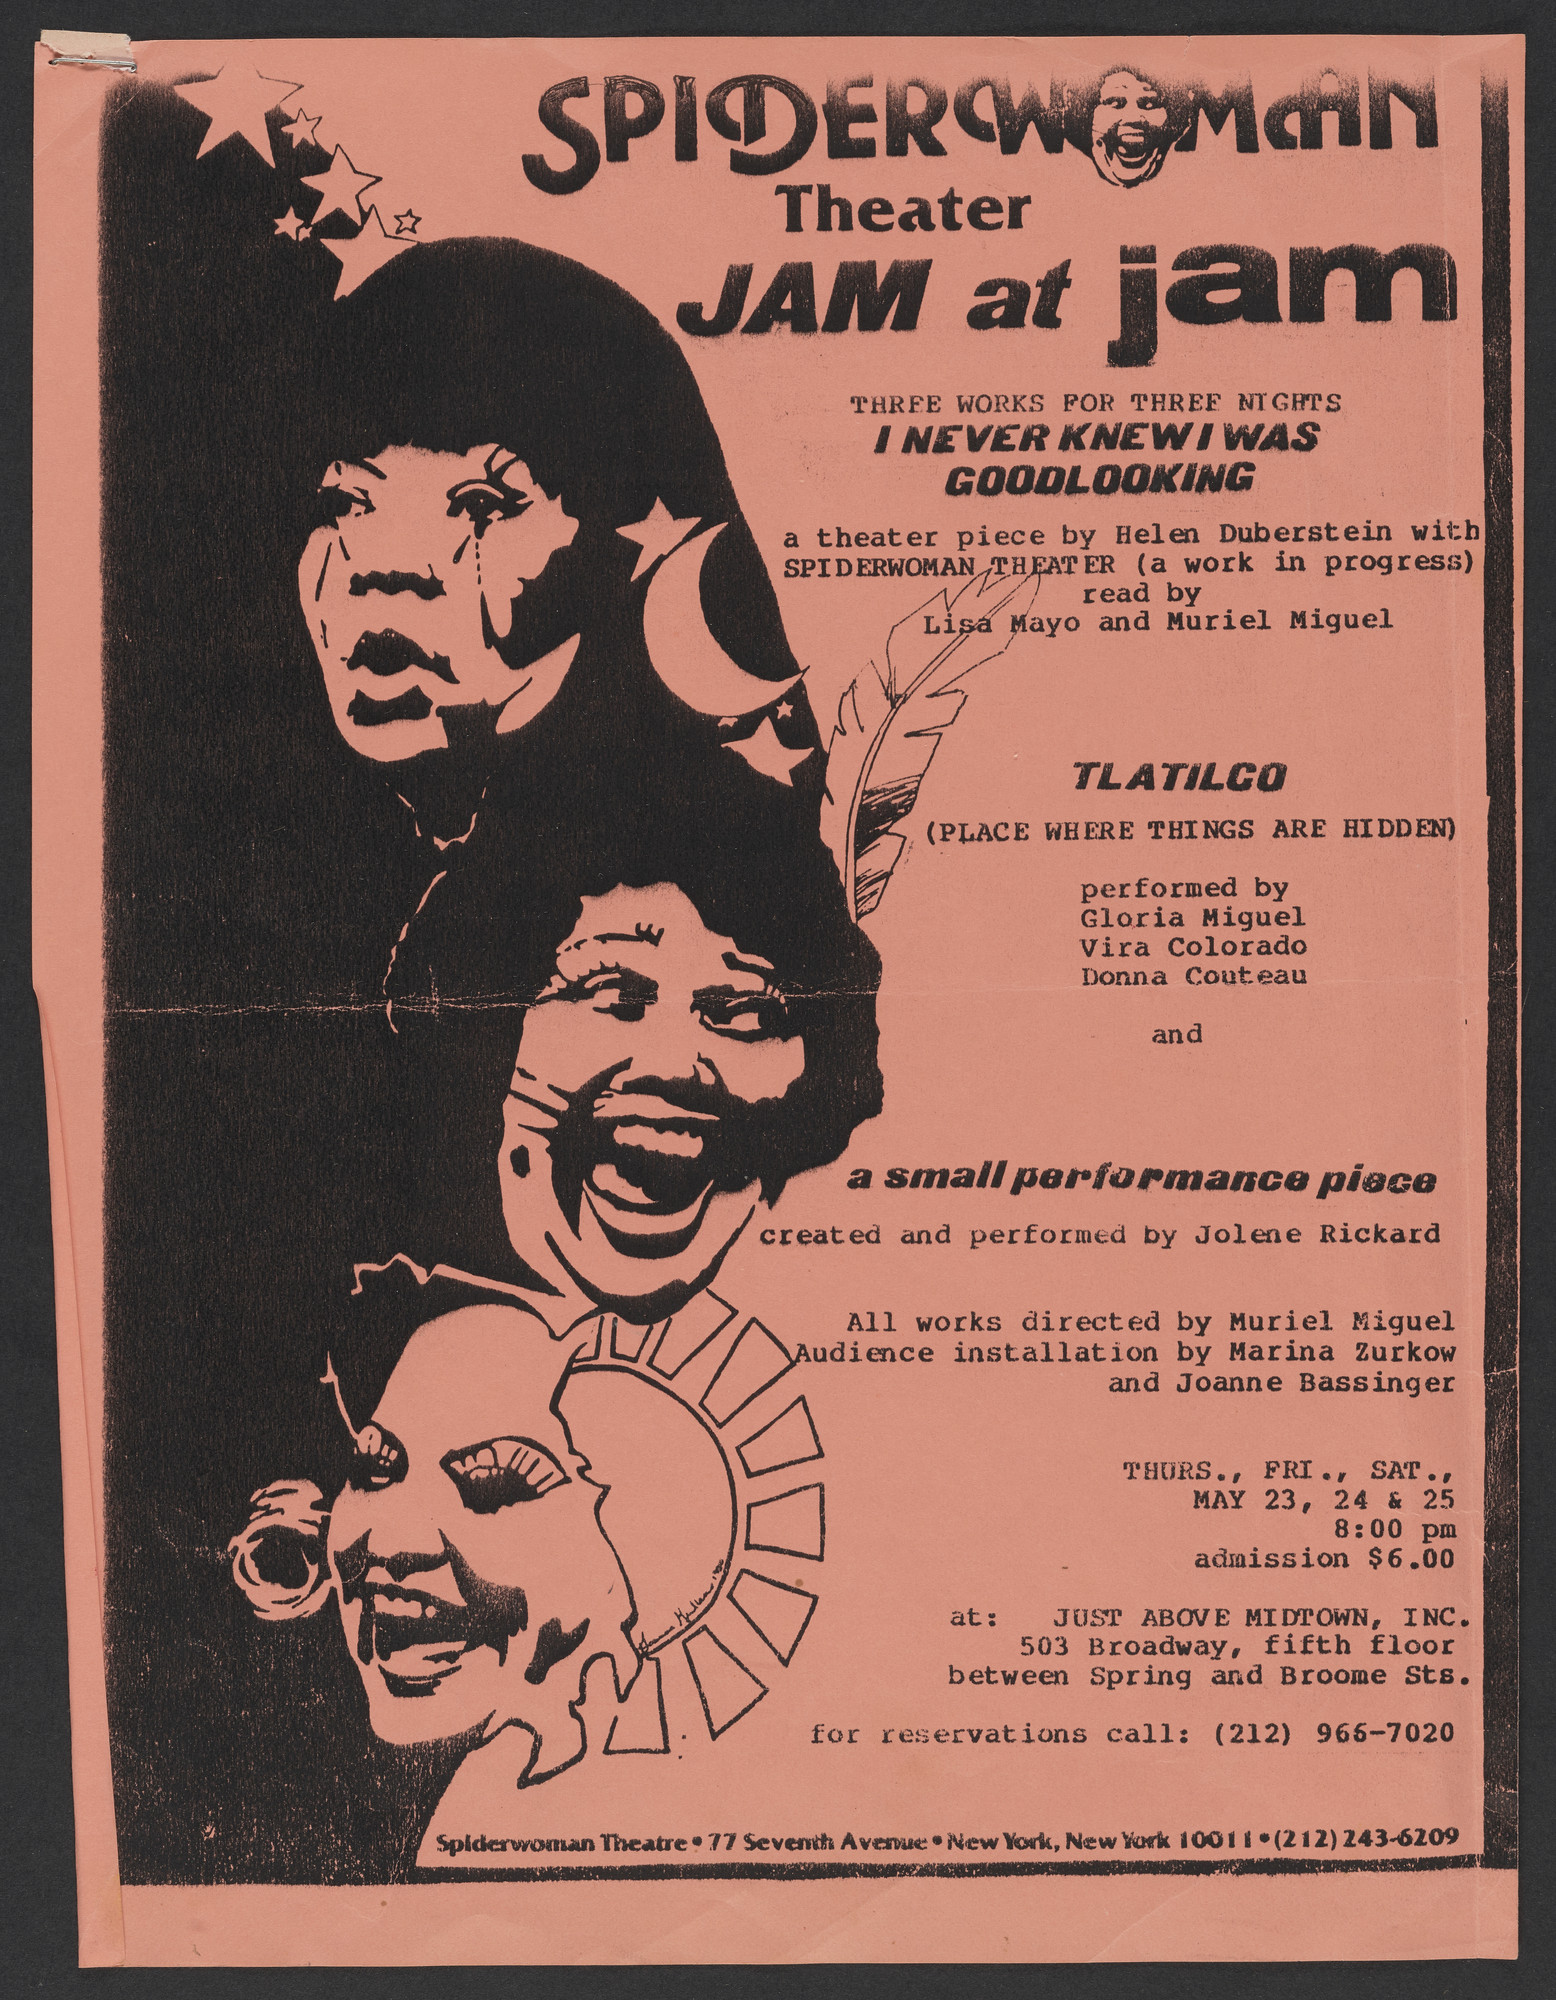 Flyer for Spiderwoman Theater's Three Works for Three Nights, 1985. Collection Linda Goode Bryant, New York